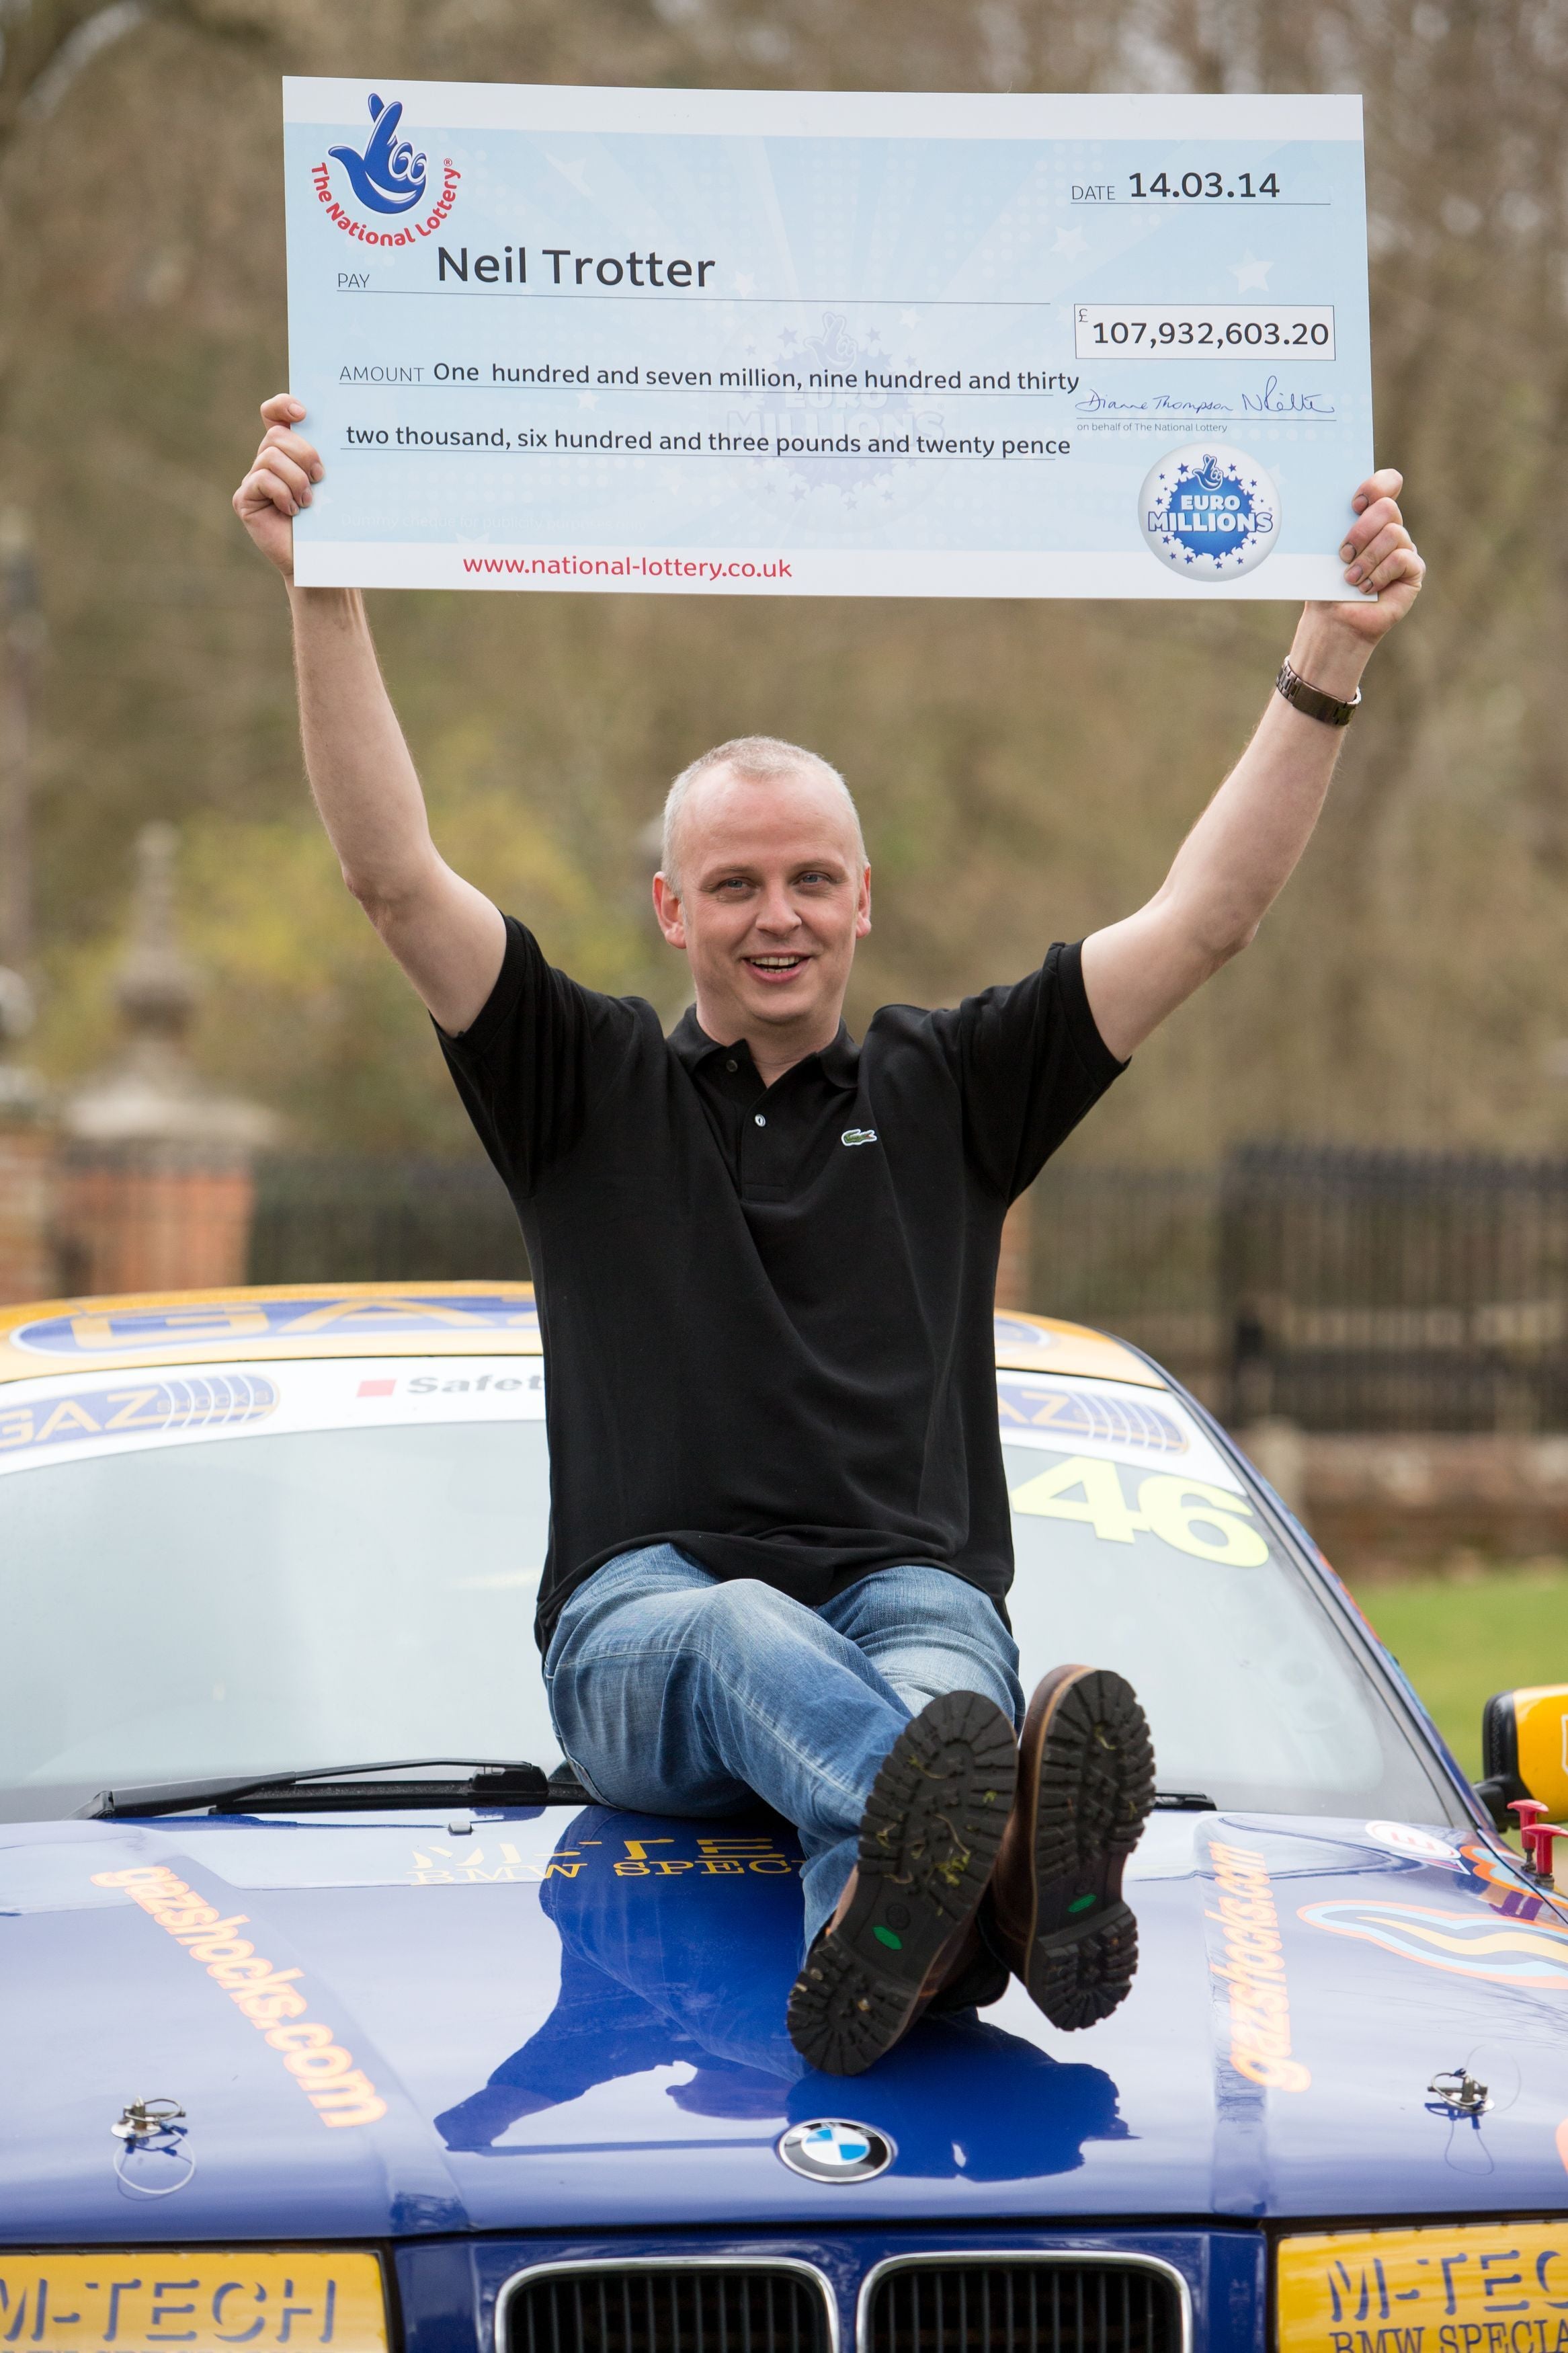 Neil Trotter became a multi millionaire overnight - but says that came with challenges